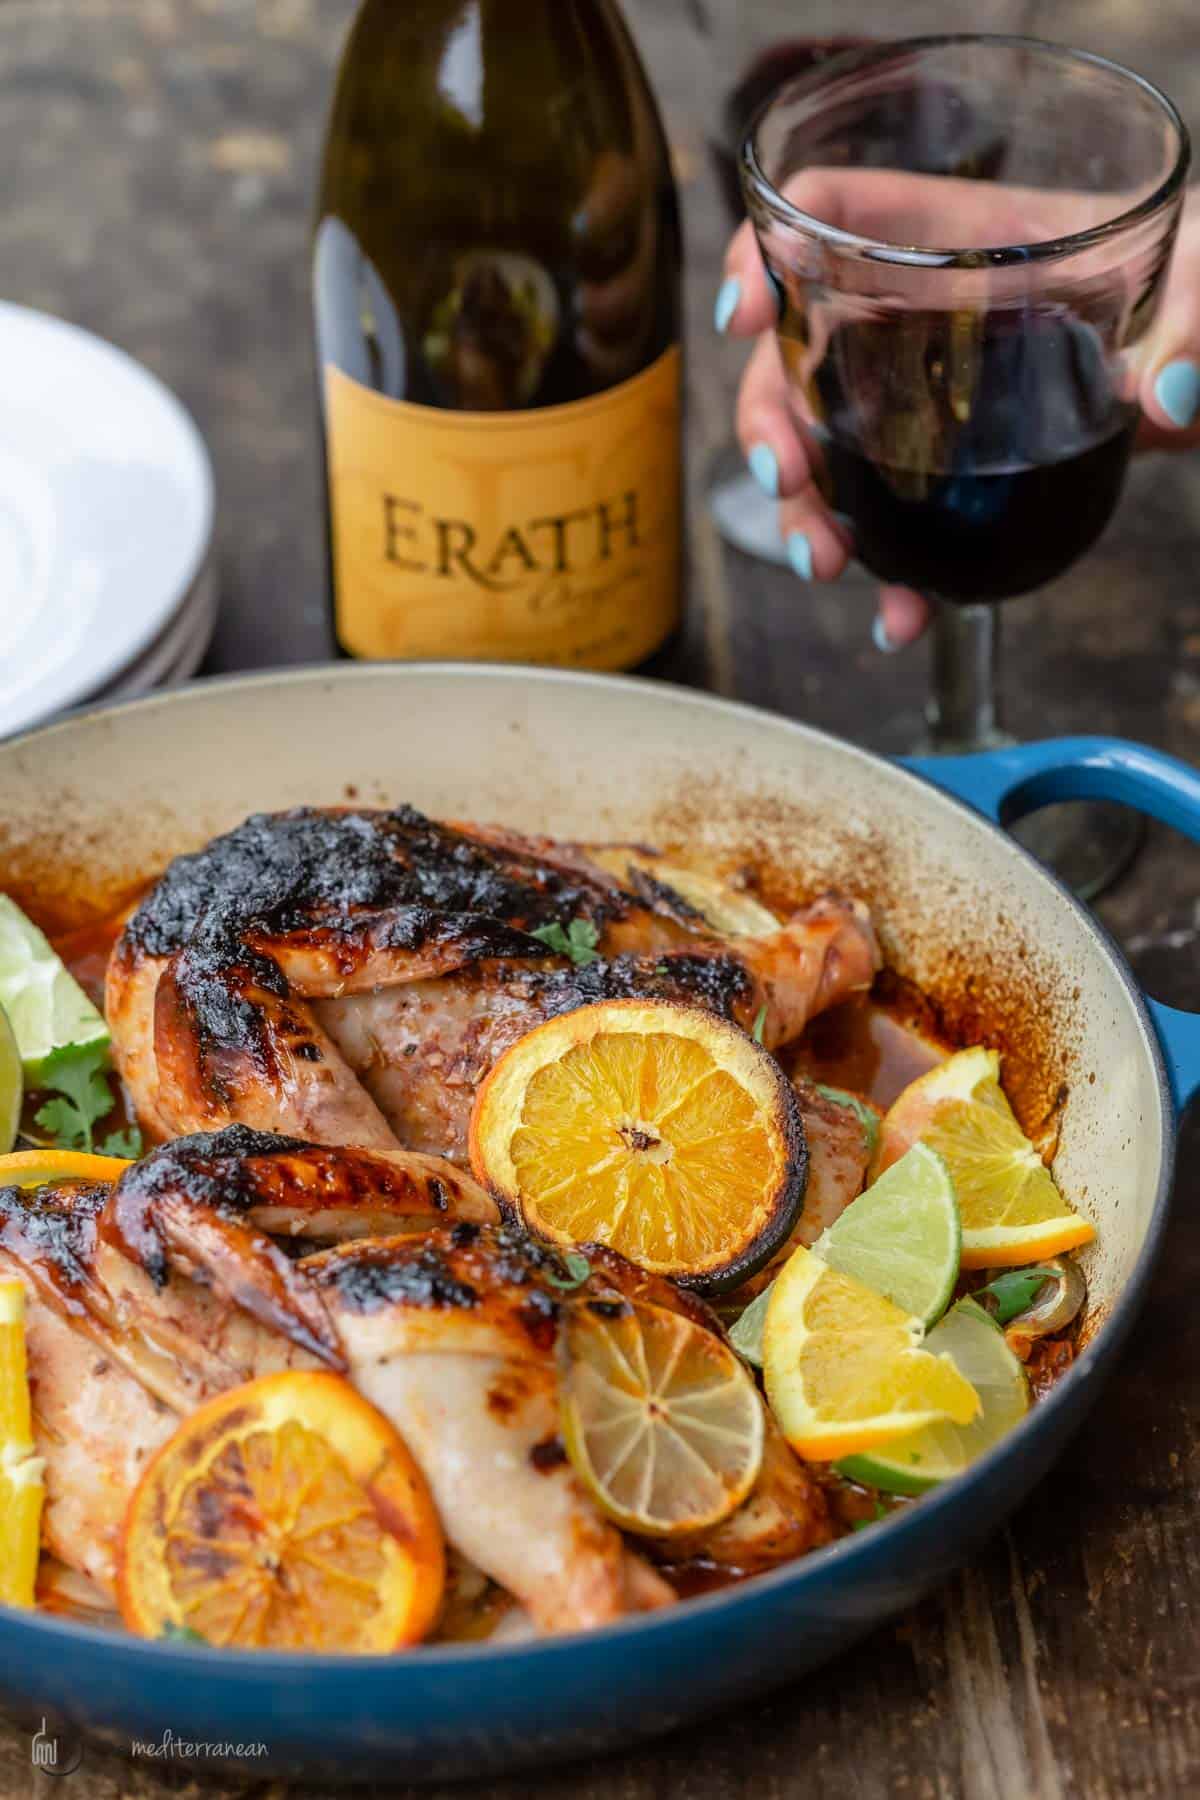 Roasted chicken with rosemary and citrus in a braising pan with a bottle of wine and a glass of wine held by a hand next to it